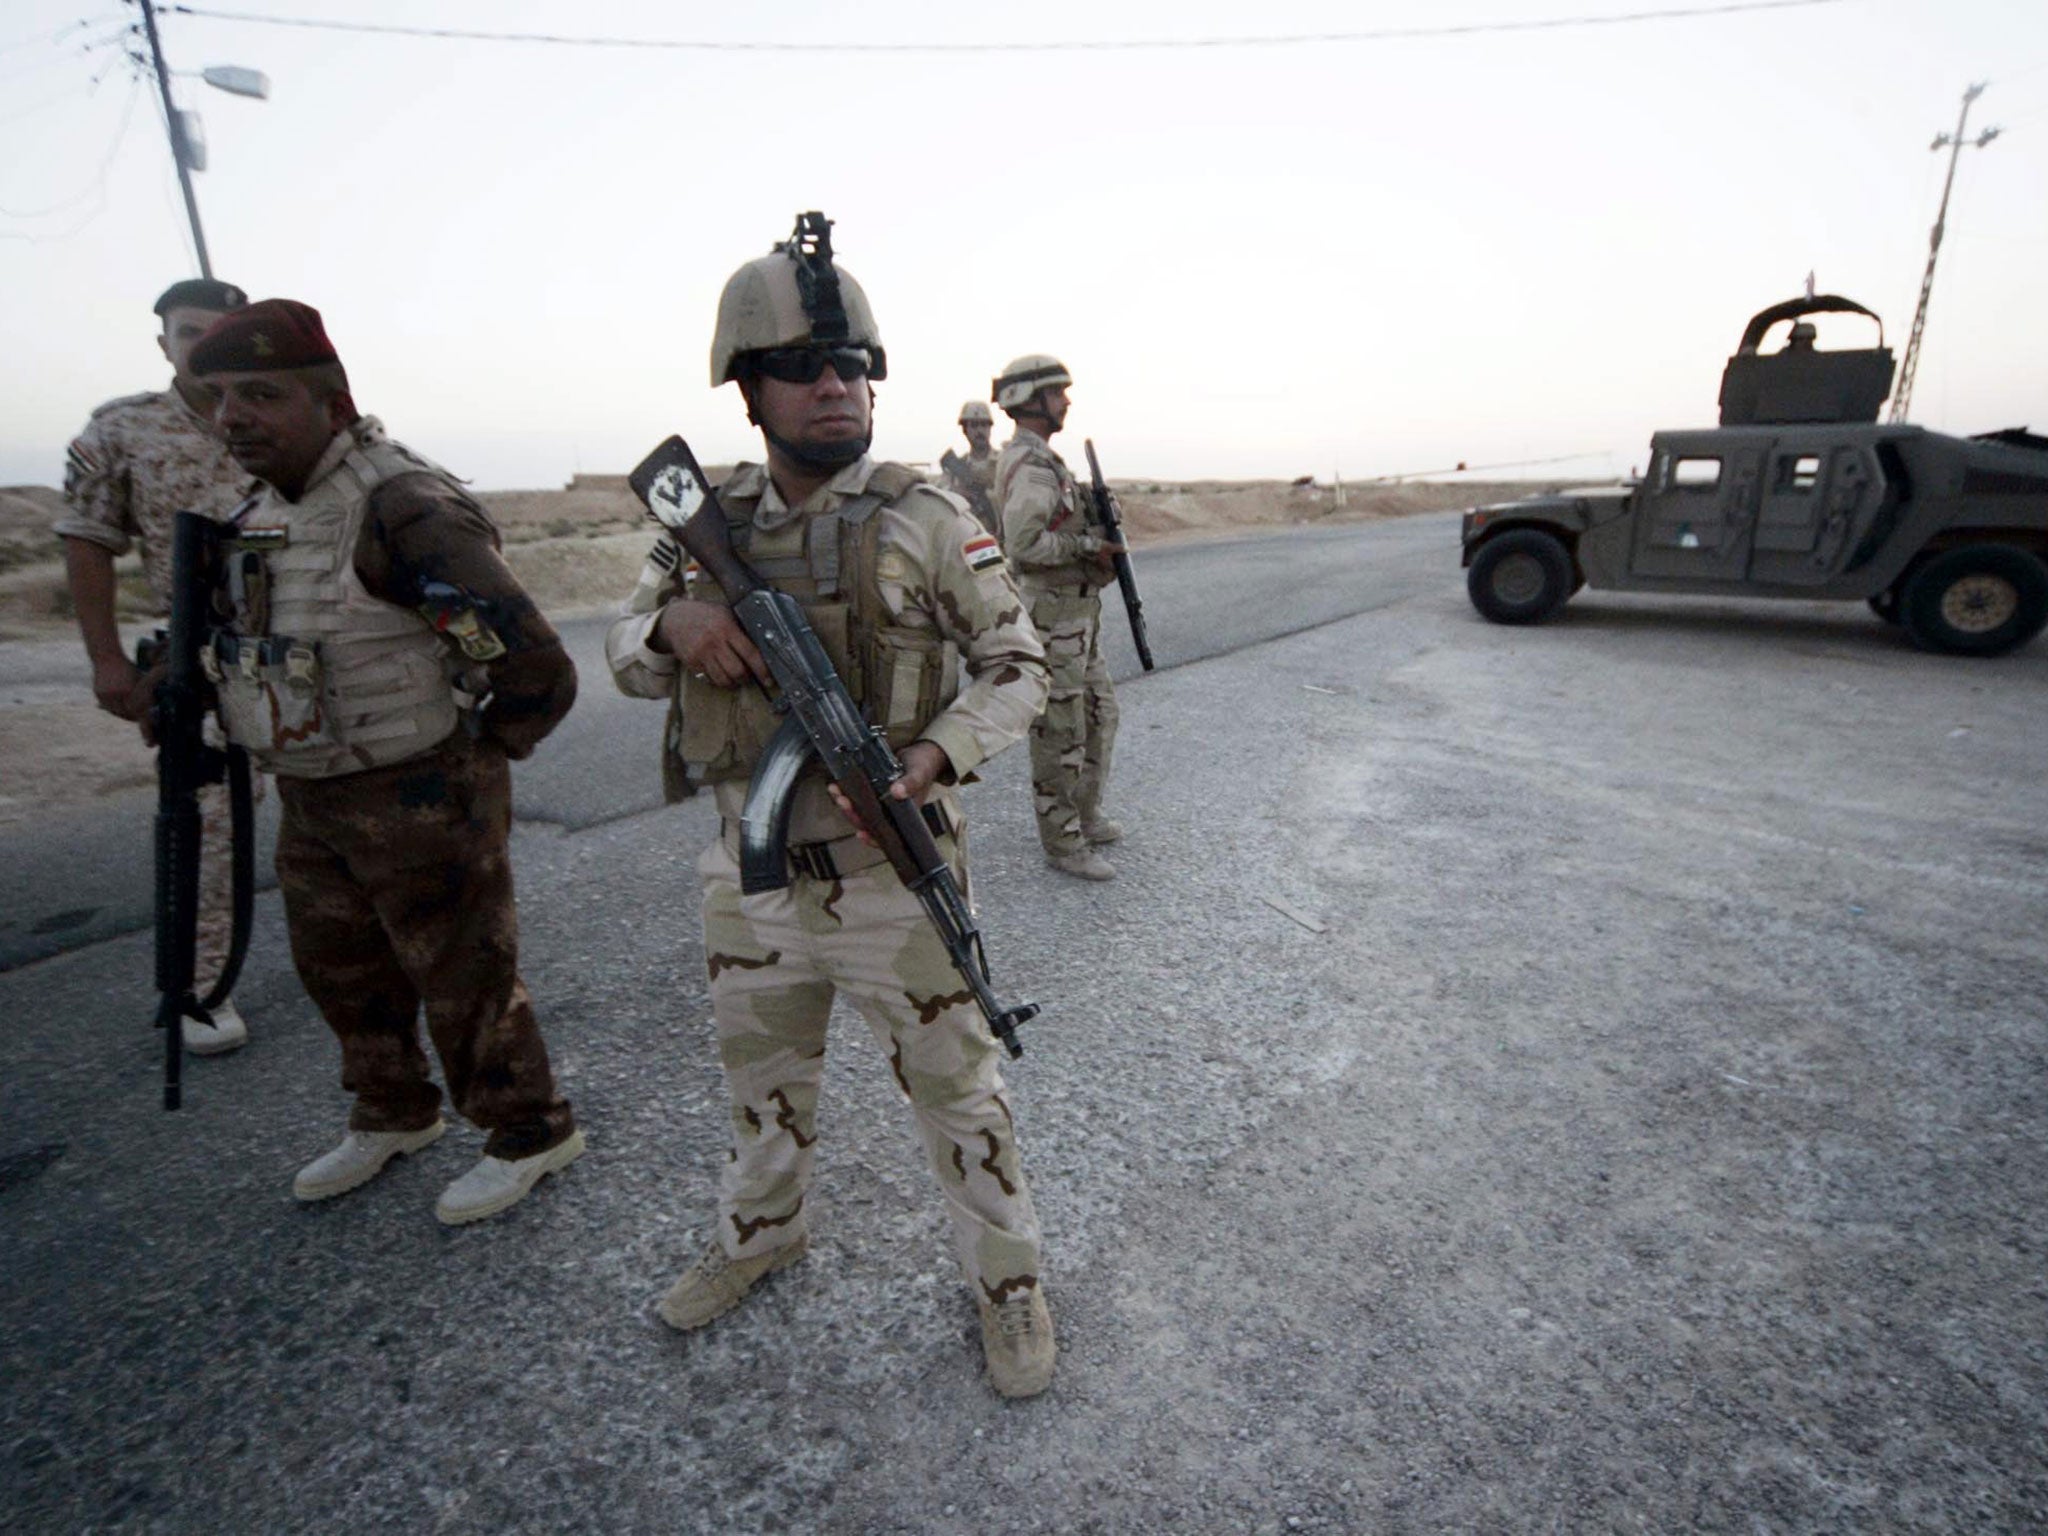 There have been claims that Iraqi soldiers have abandoned their positions along the border with Saudi Arabia